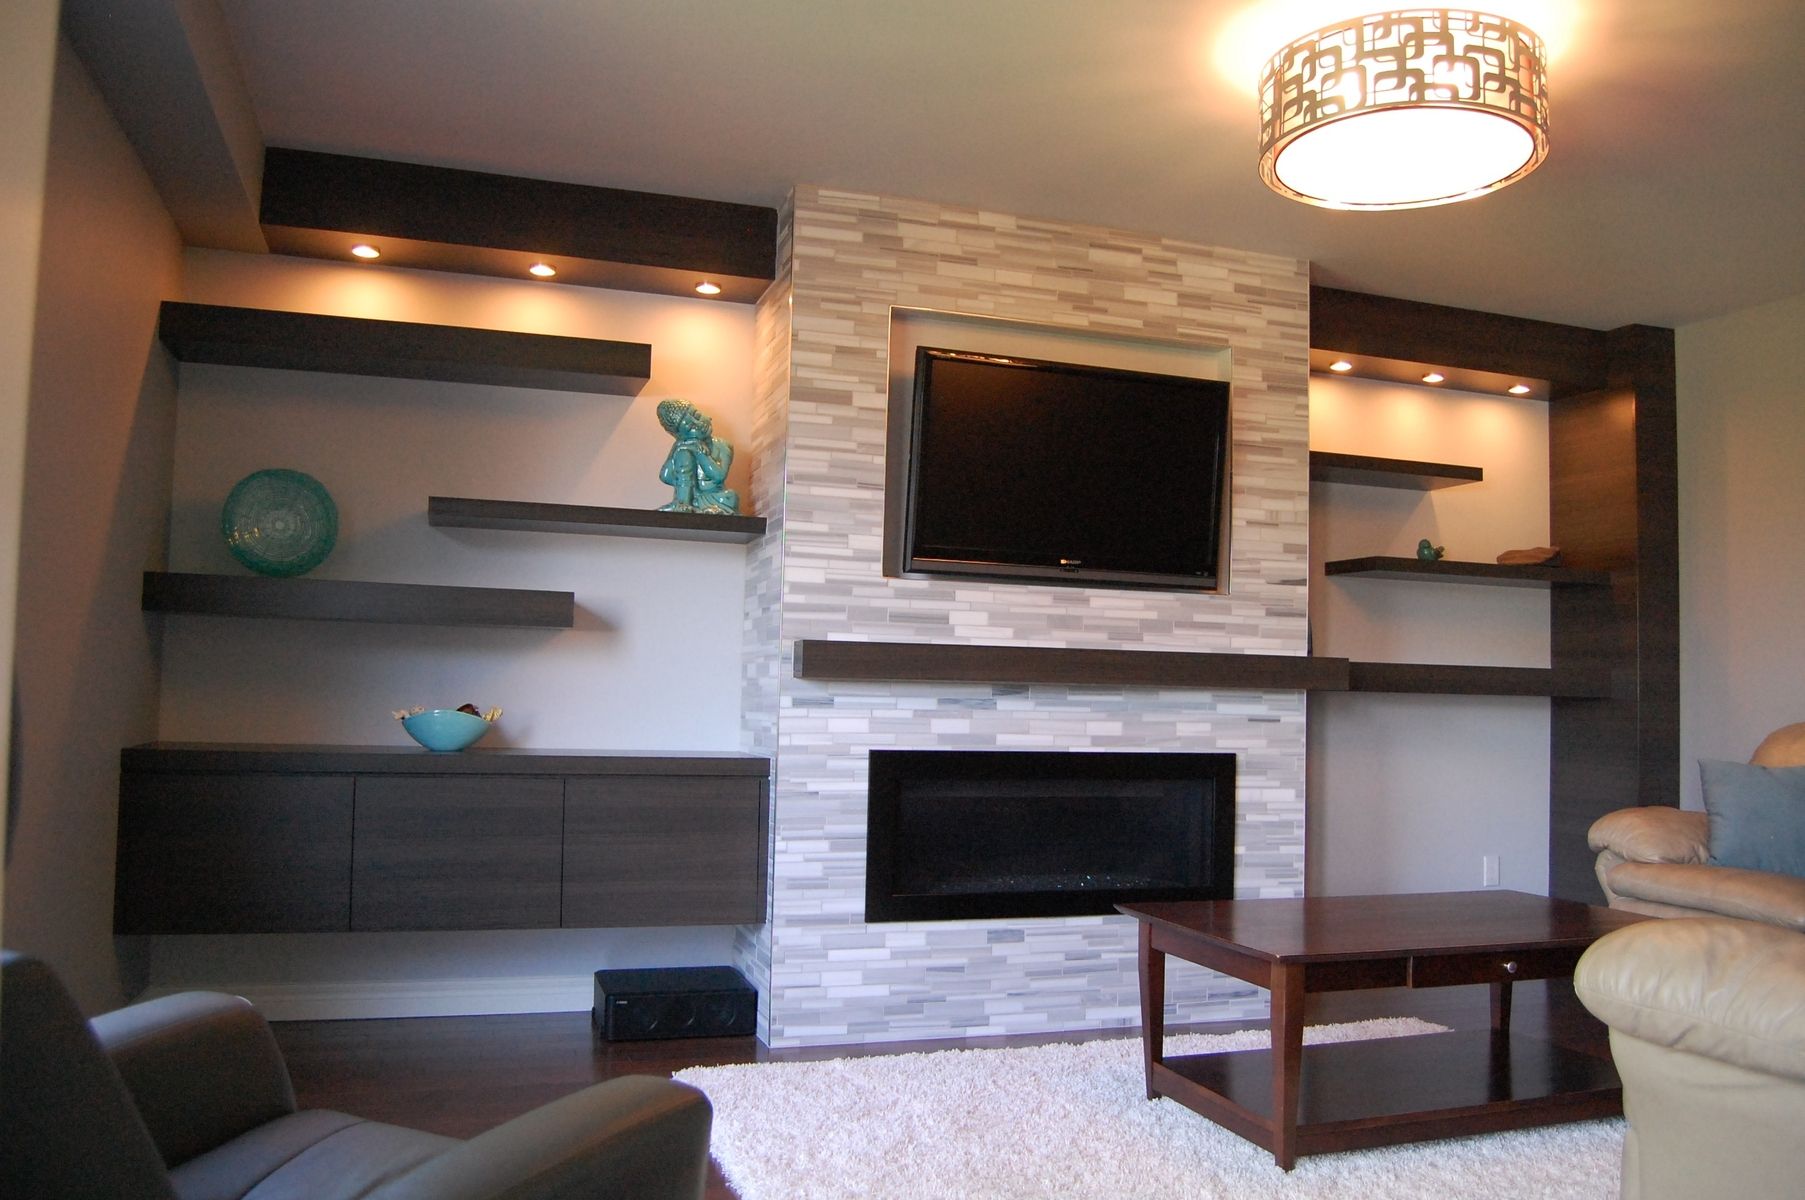 Fireplace Under Tv Best Of Custom Modern Wall Unit Made Pletely From A Printed